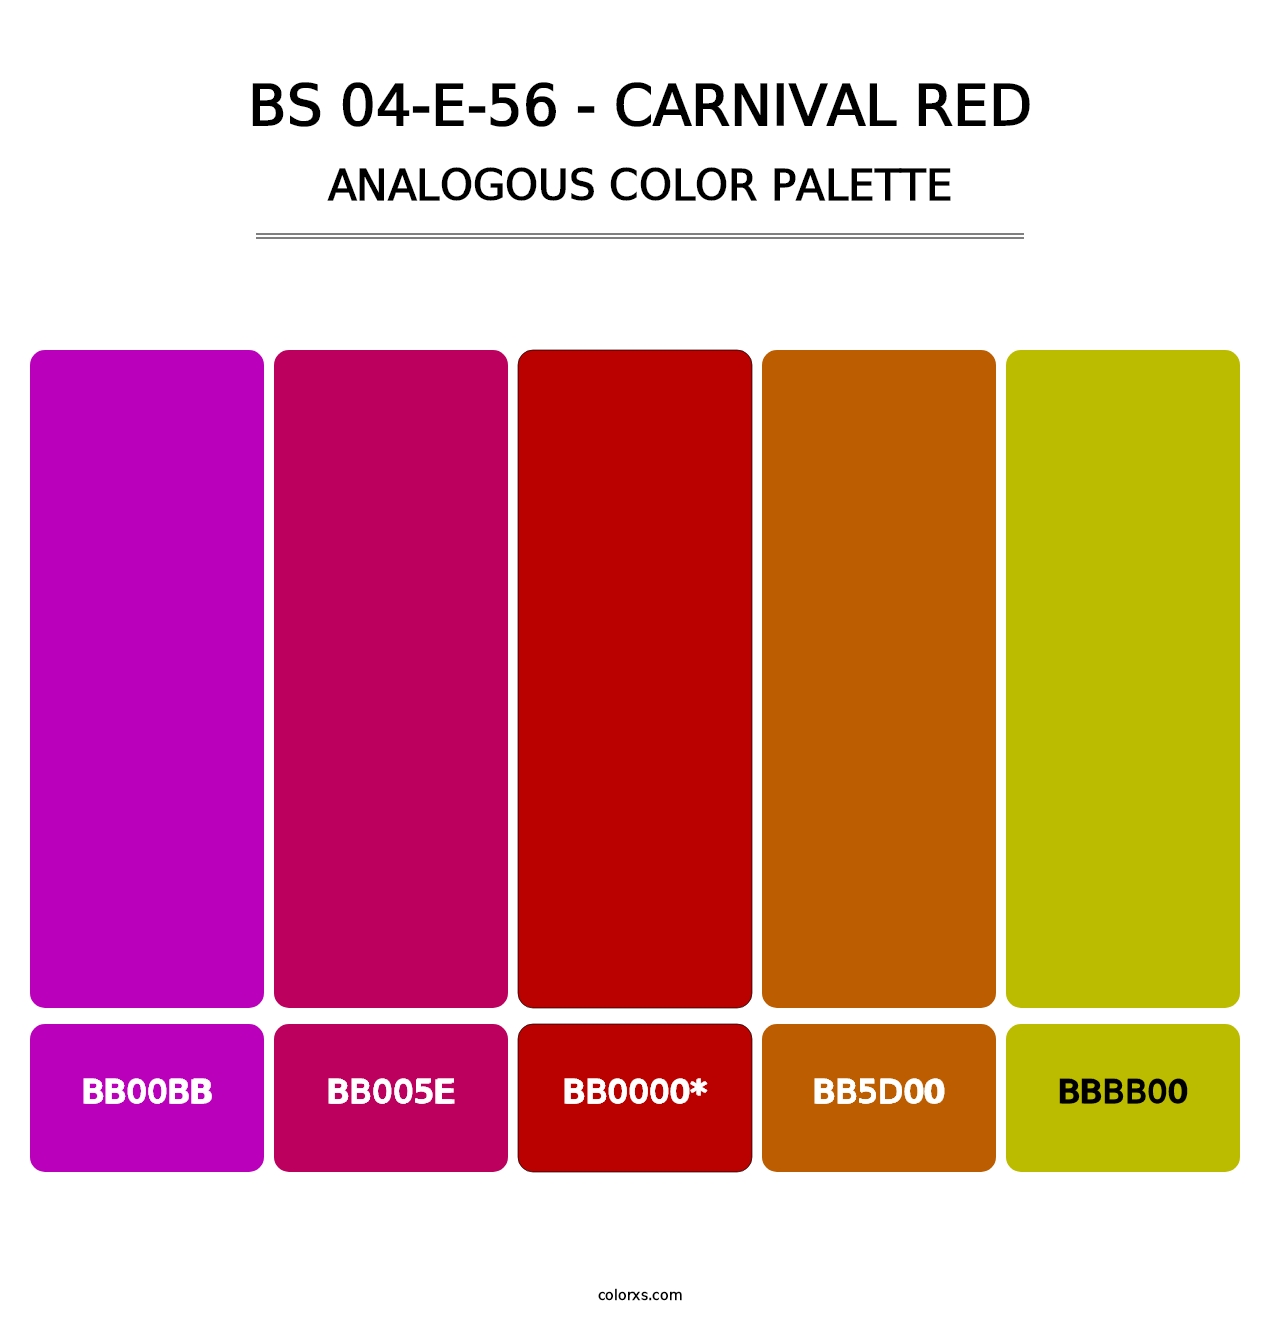 BS 04-E-56 - Carnival Red - Analogous Color Palette